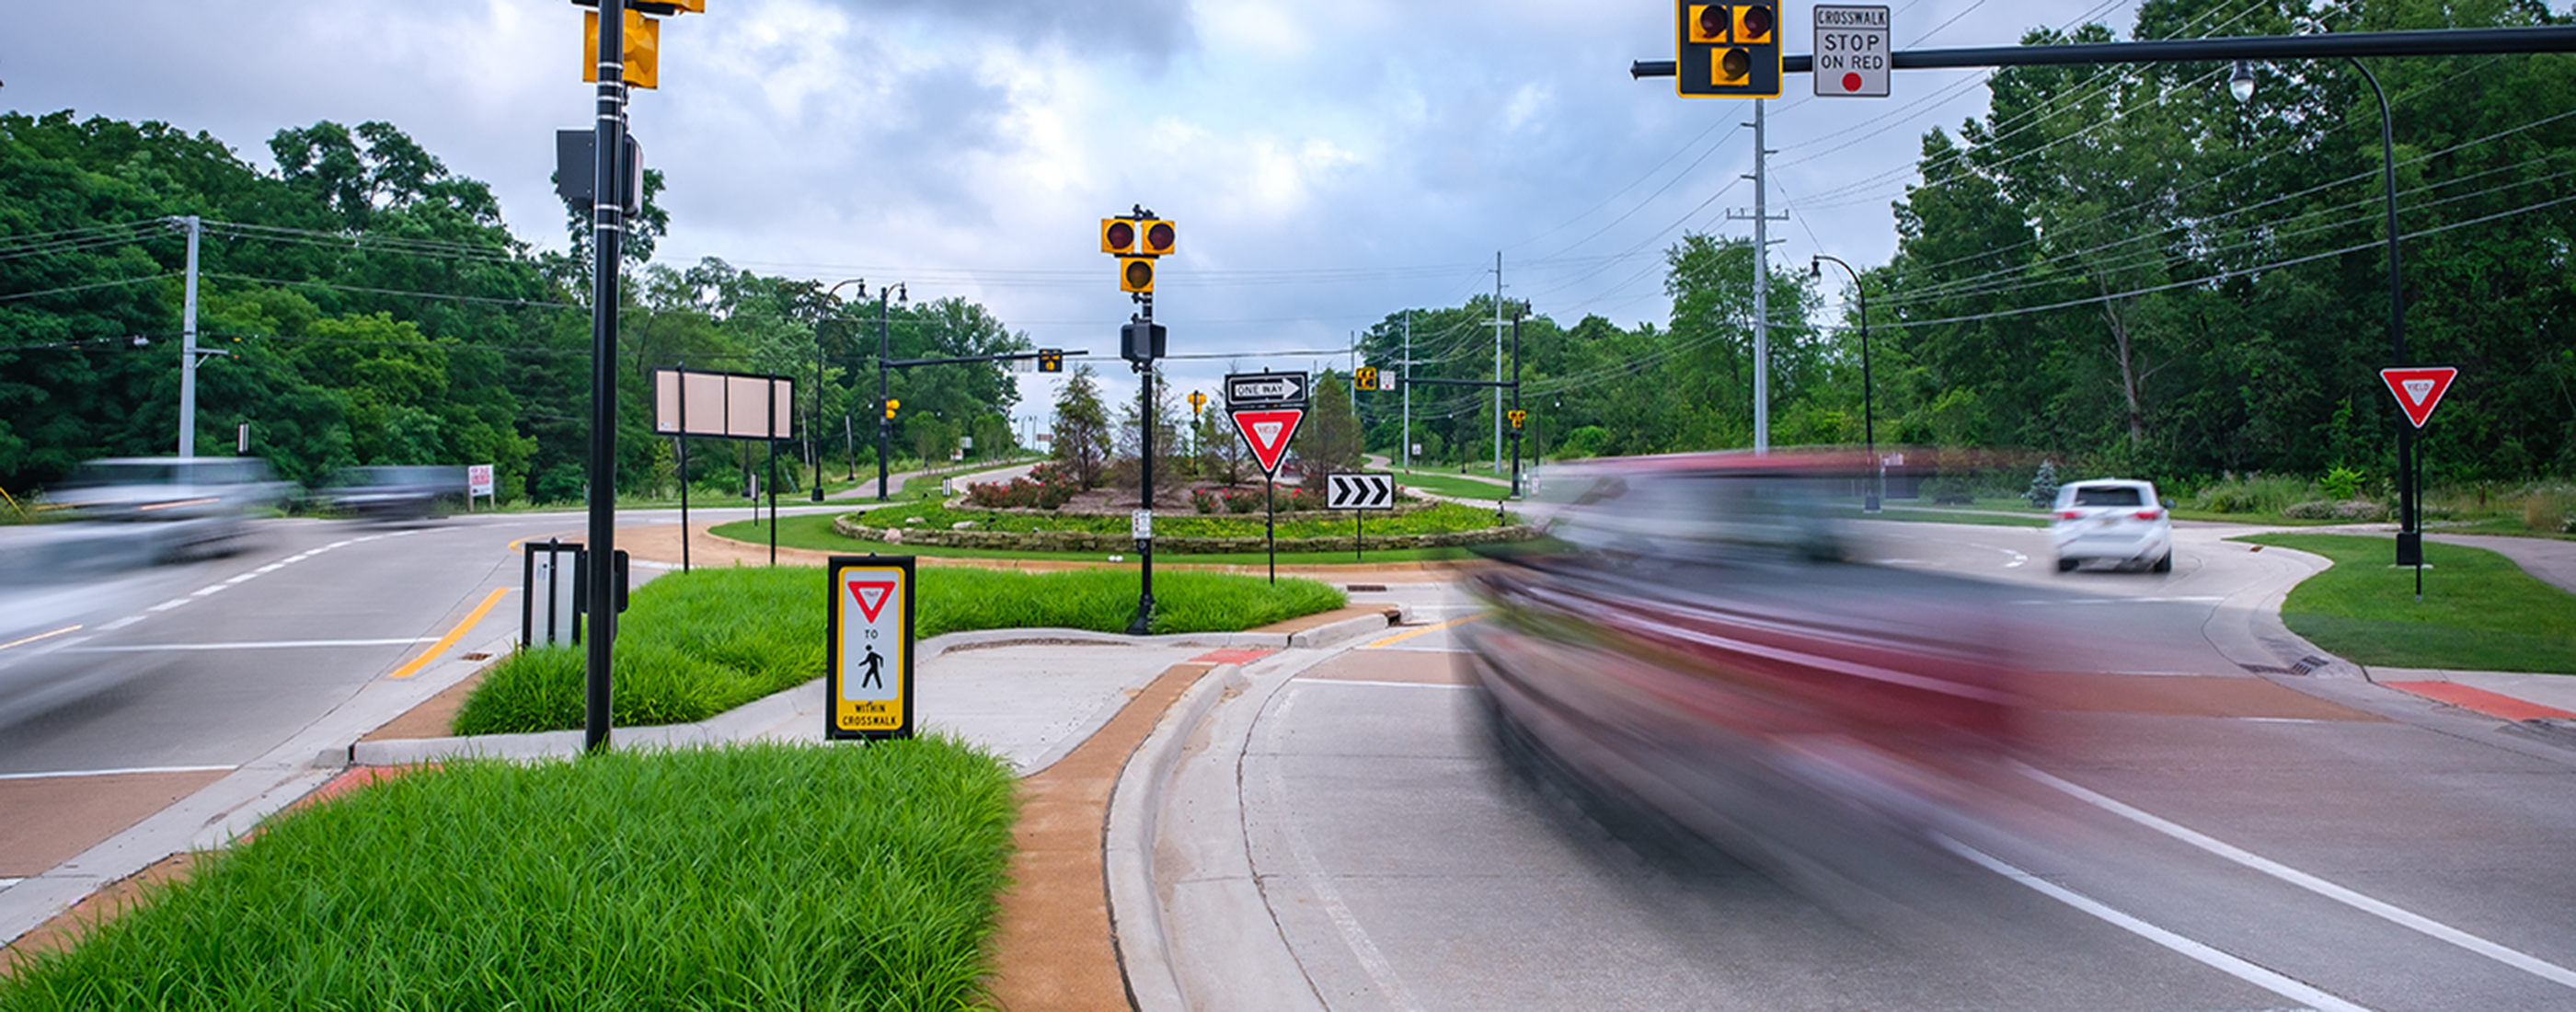 One of many roundabouts along the reconstructed Baldwin Road corridor.